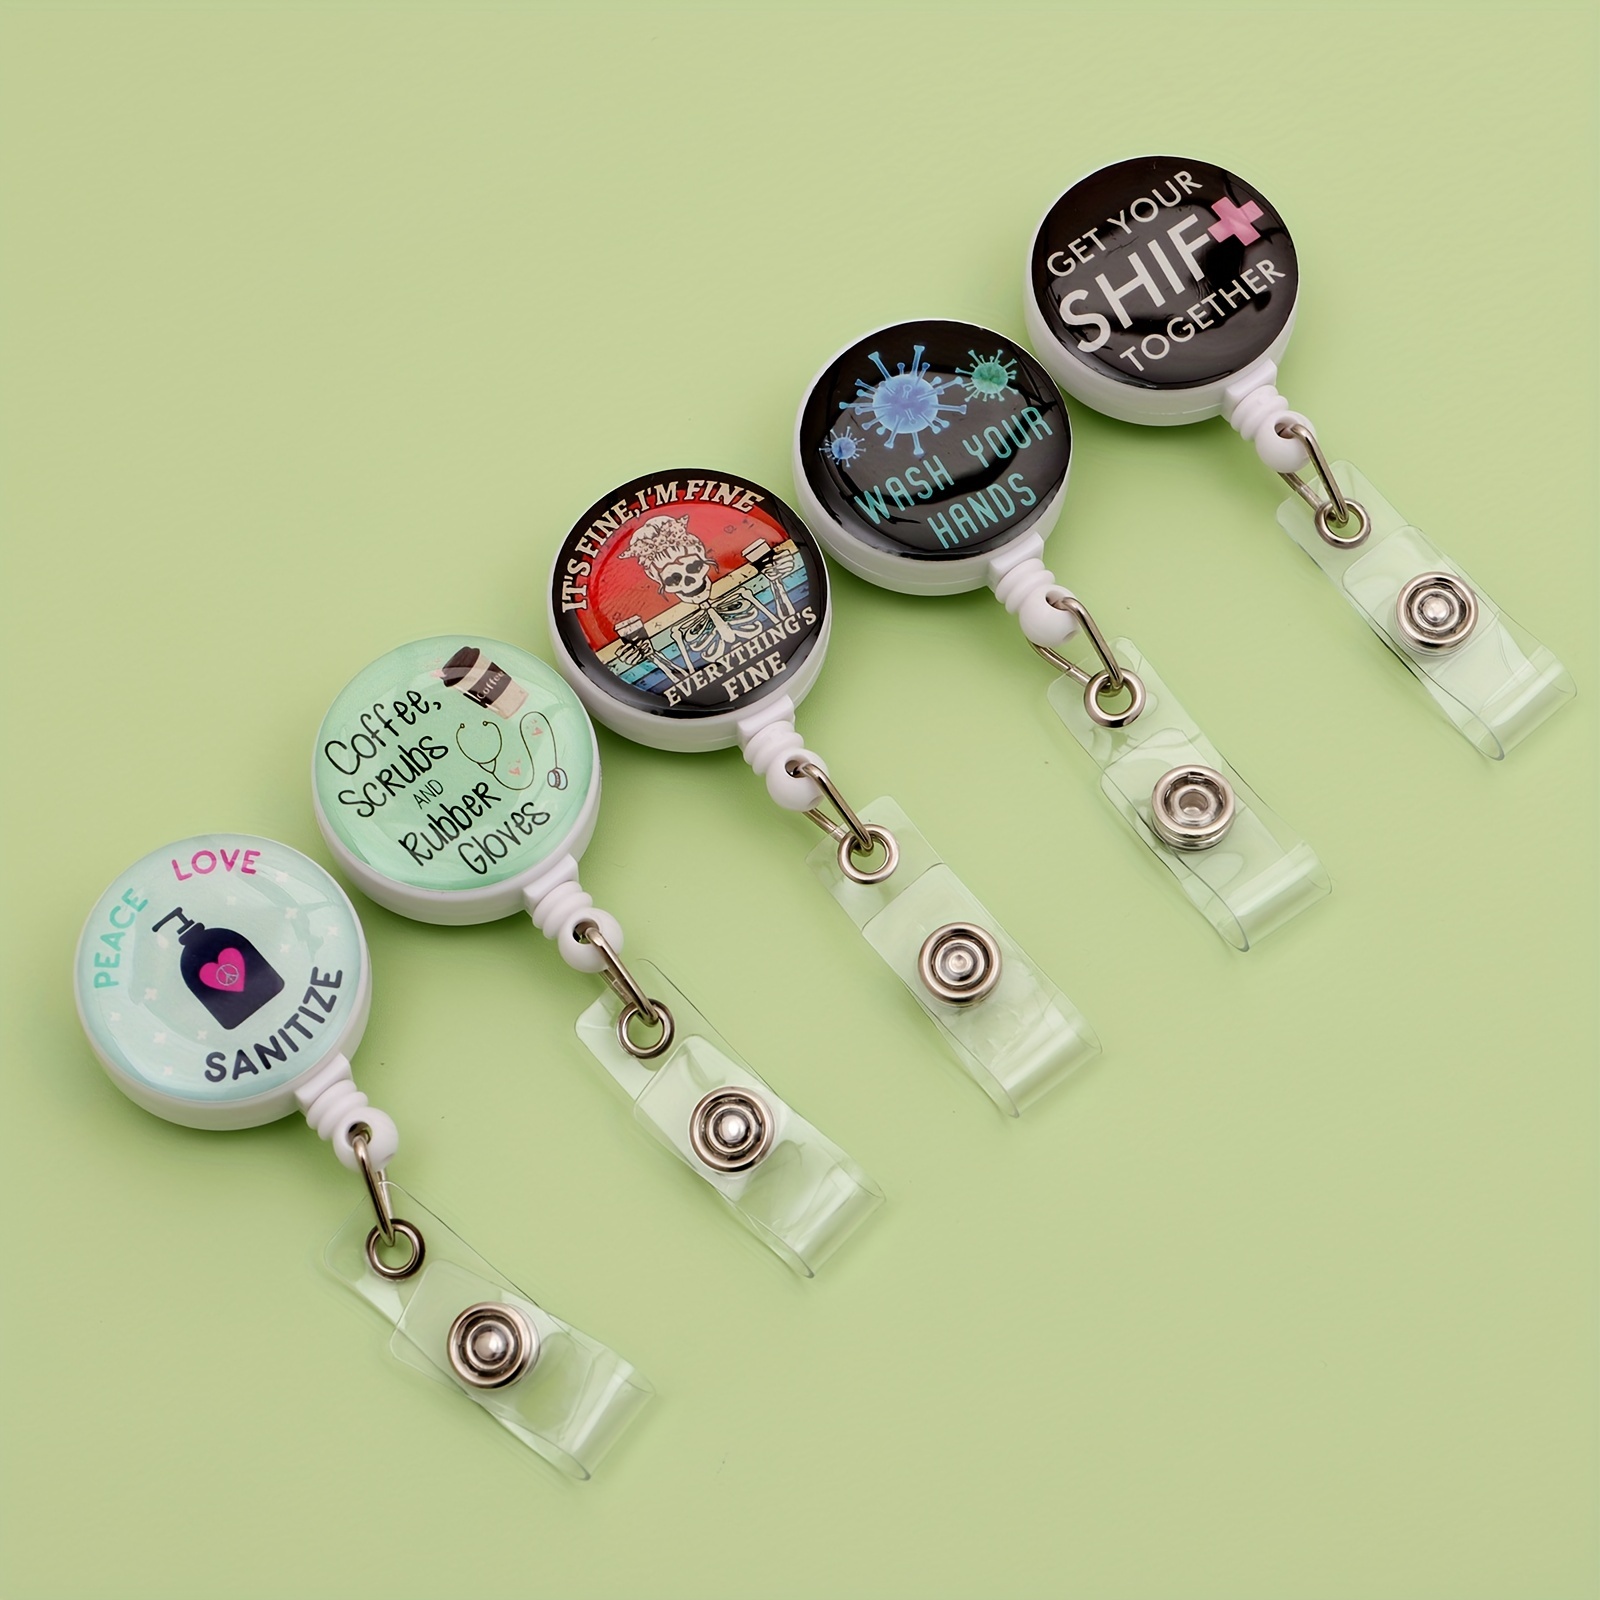 1pc Nurse Badge Reel - Cute Badge Holder Retractable with ID Clip for Nurse Accessories for Work, Funny Rn Badge Holder Reels with Swivel Alligator